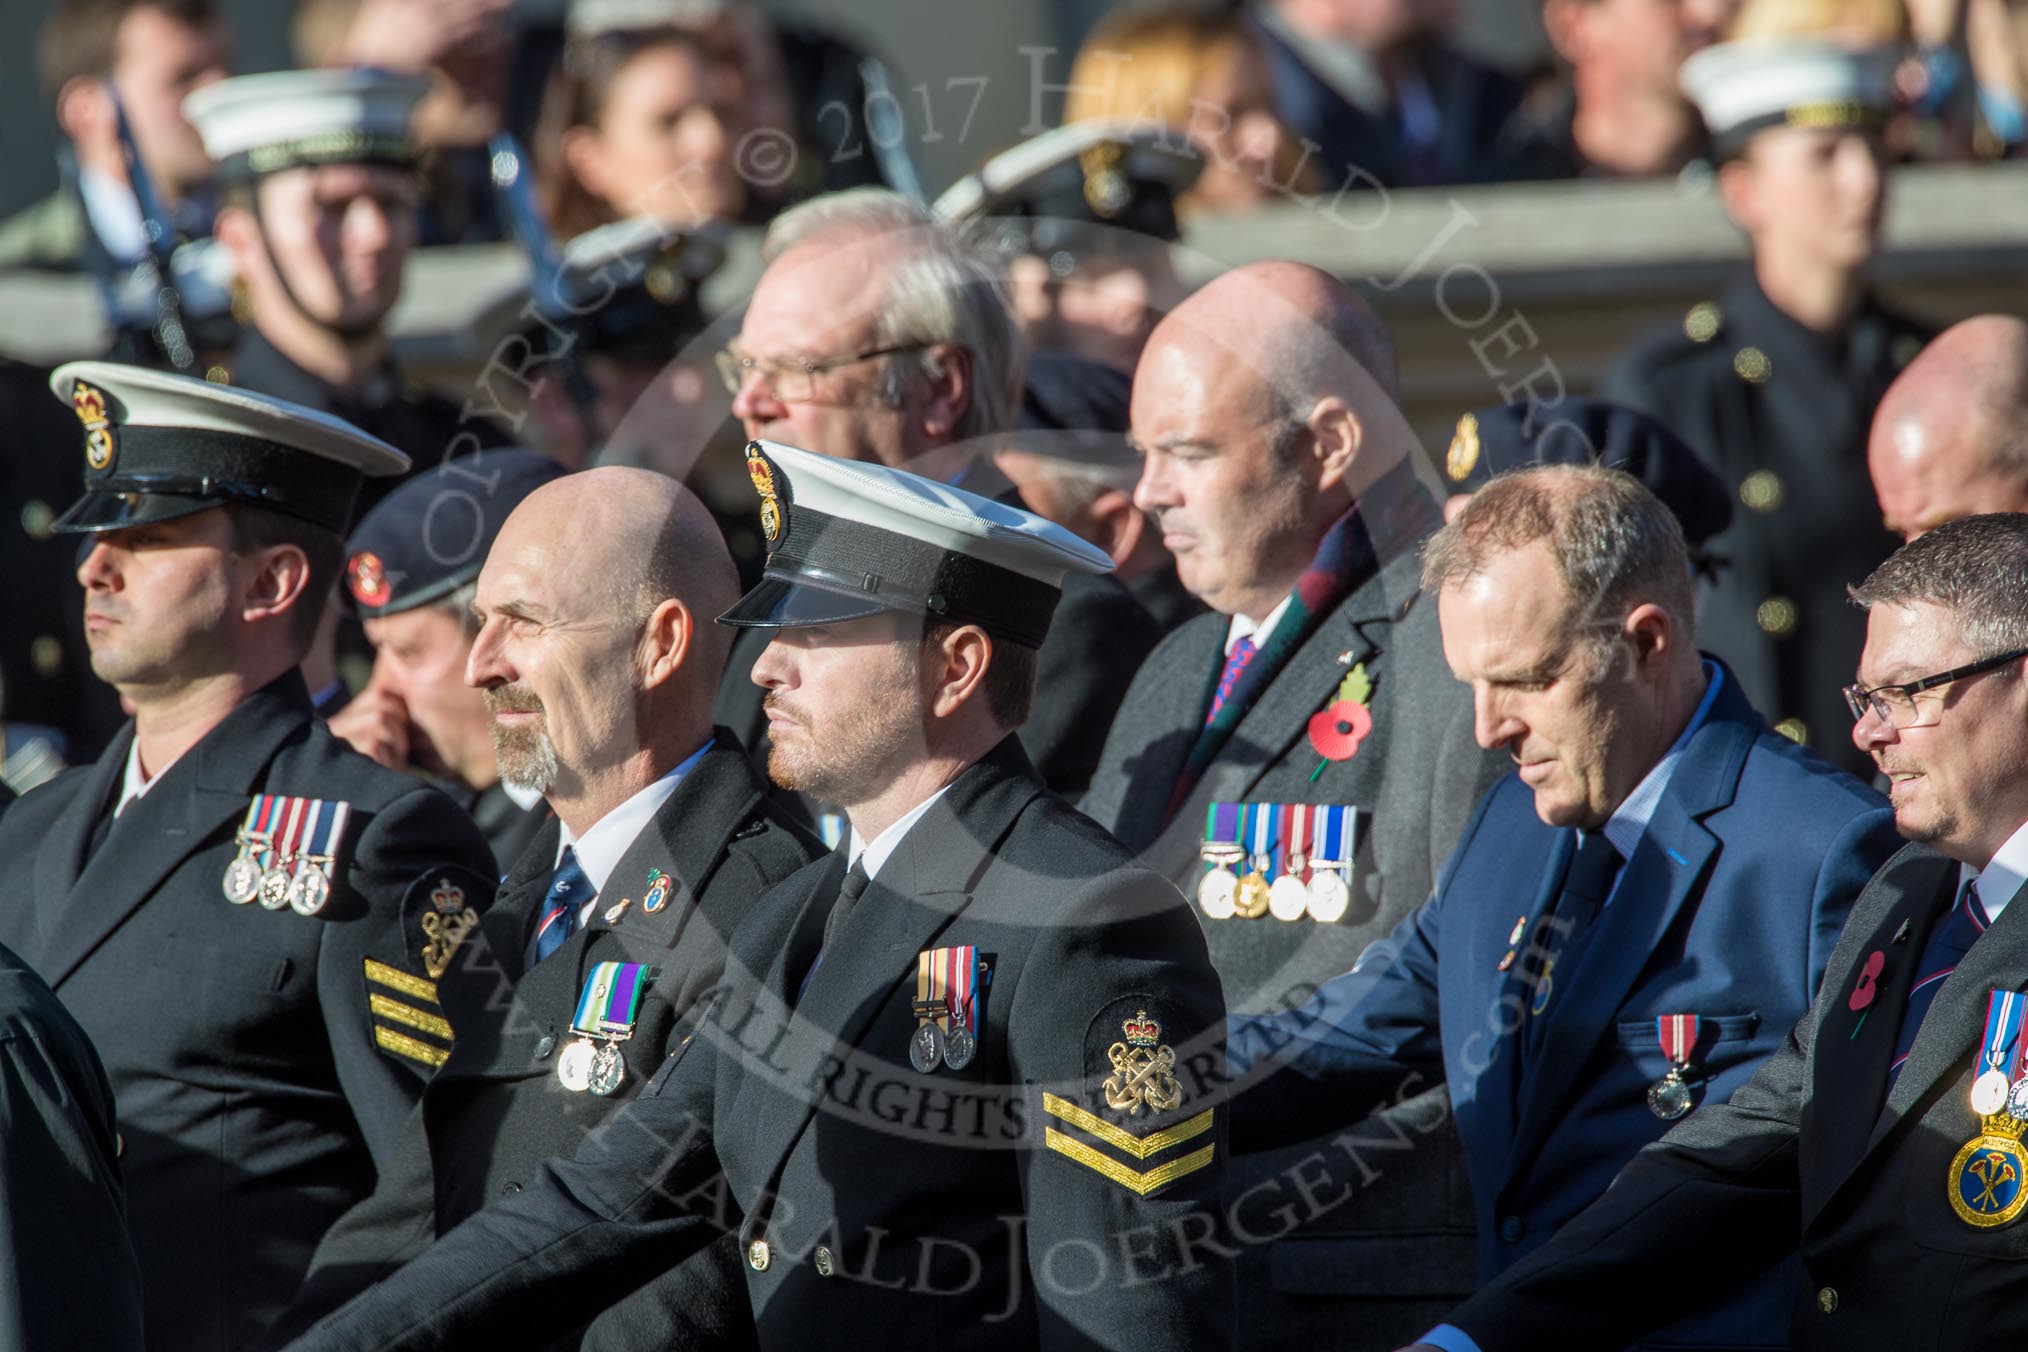 HMS Illustrious Association  (Group E22, 45 members) during the Royal British Legion March Past on Remembrance Sunday at the Cenotaph, Whitehall, Westminster, London, 11 November 2018, 11:44.